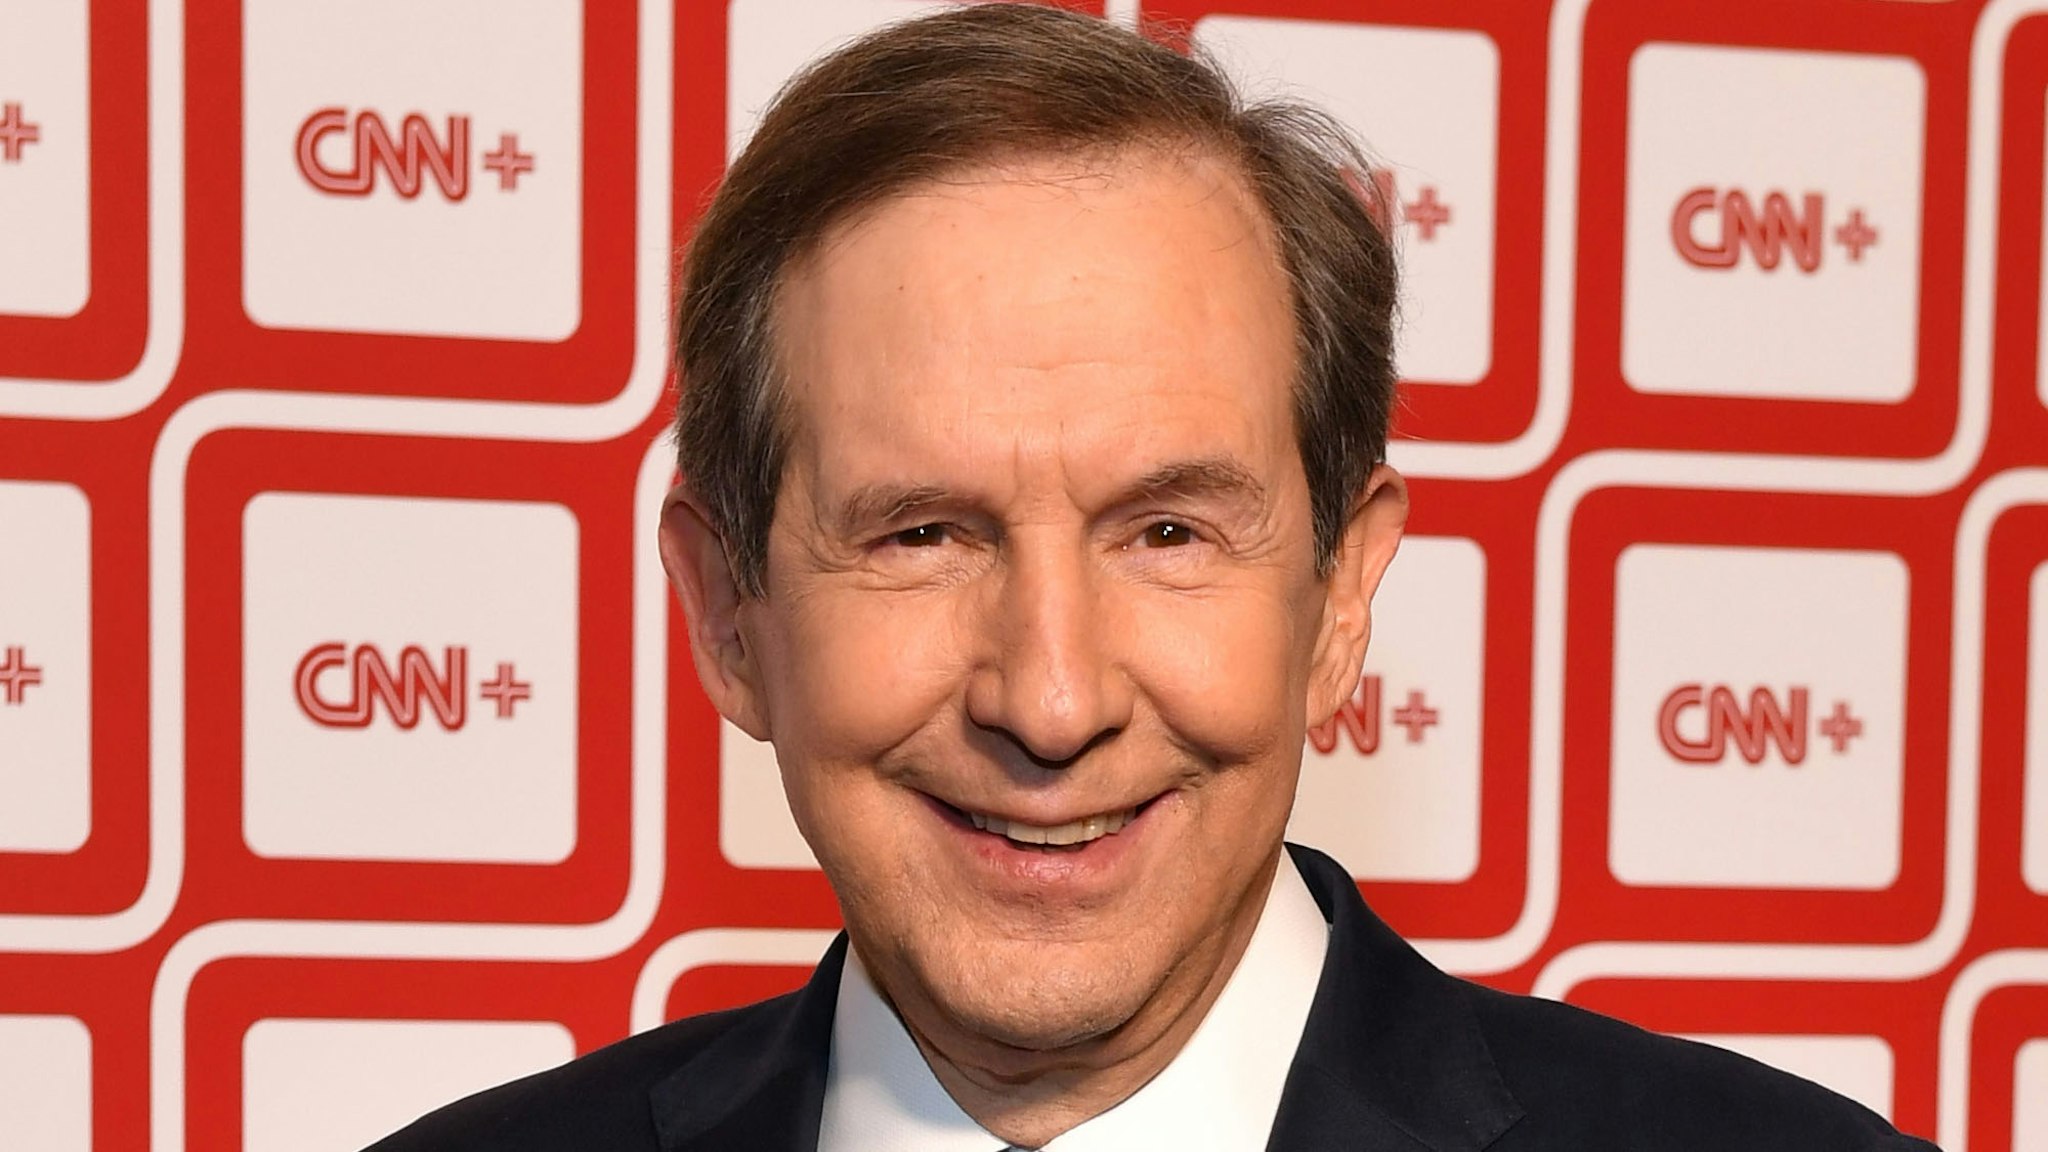 NEW YORK, NEW YORK - MARCH 28: Chris Wallace attends the CNN+ Launch Event at PEAK NYC Hudson Yards on March 28, 2022 in New York City.